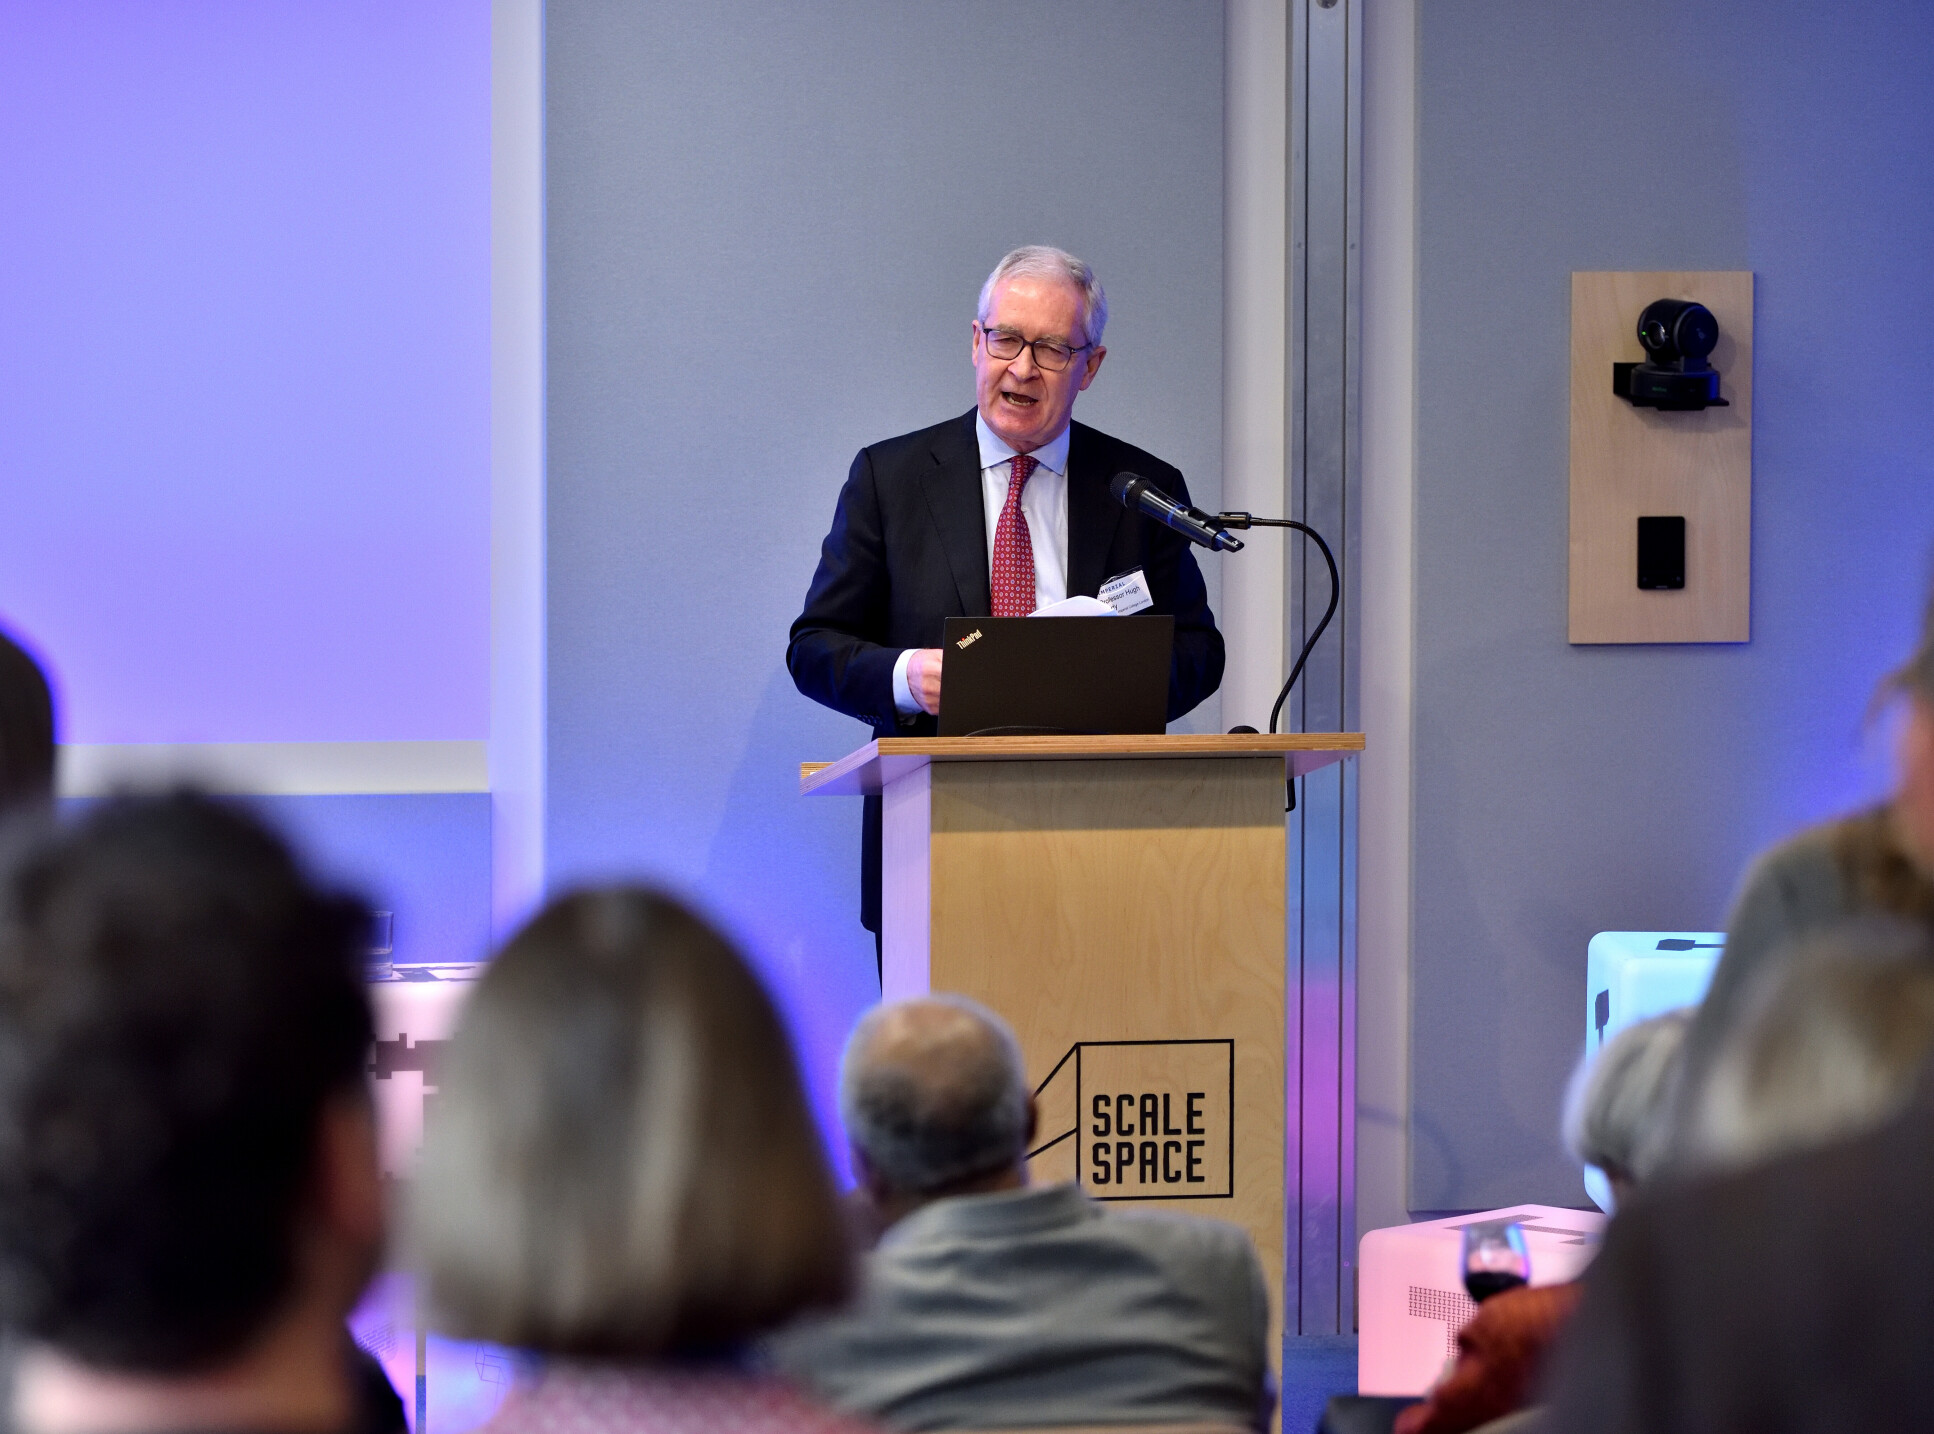 President Hugh Brady thanked guests for their support and shared Imperial's new strategy.